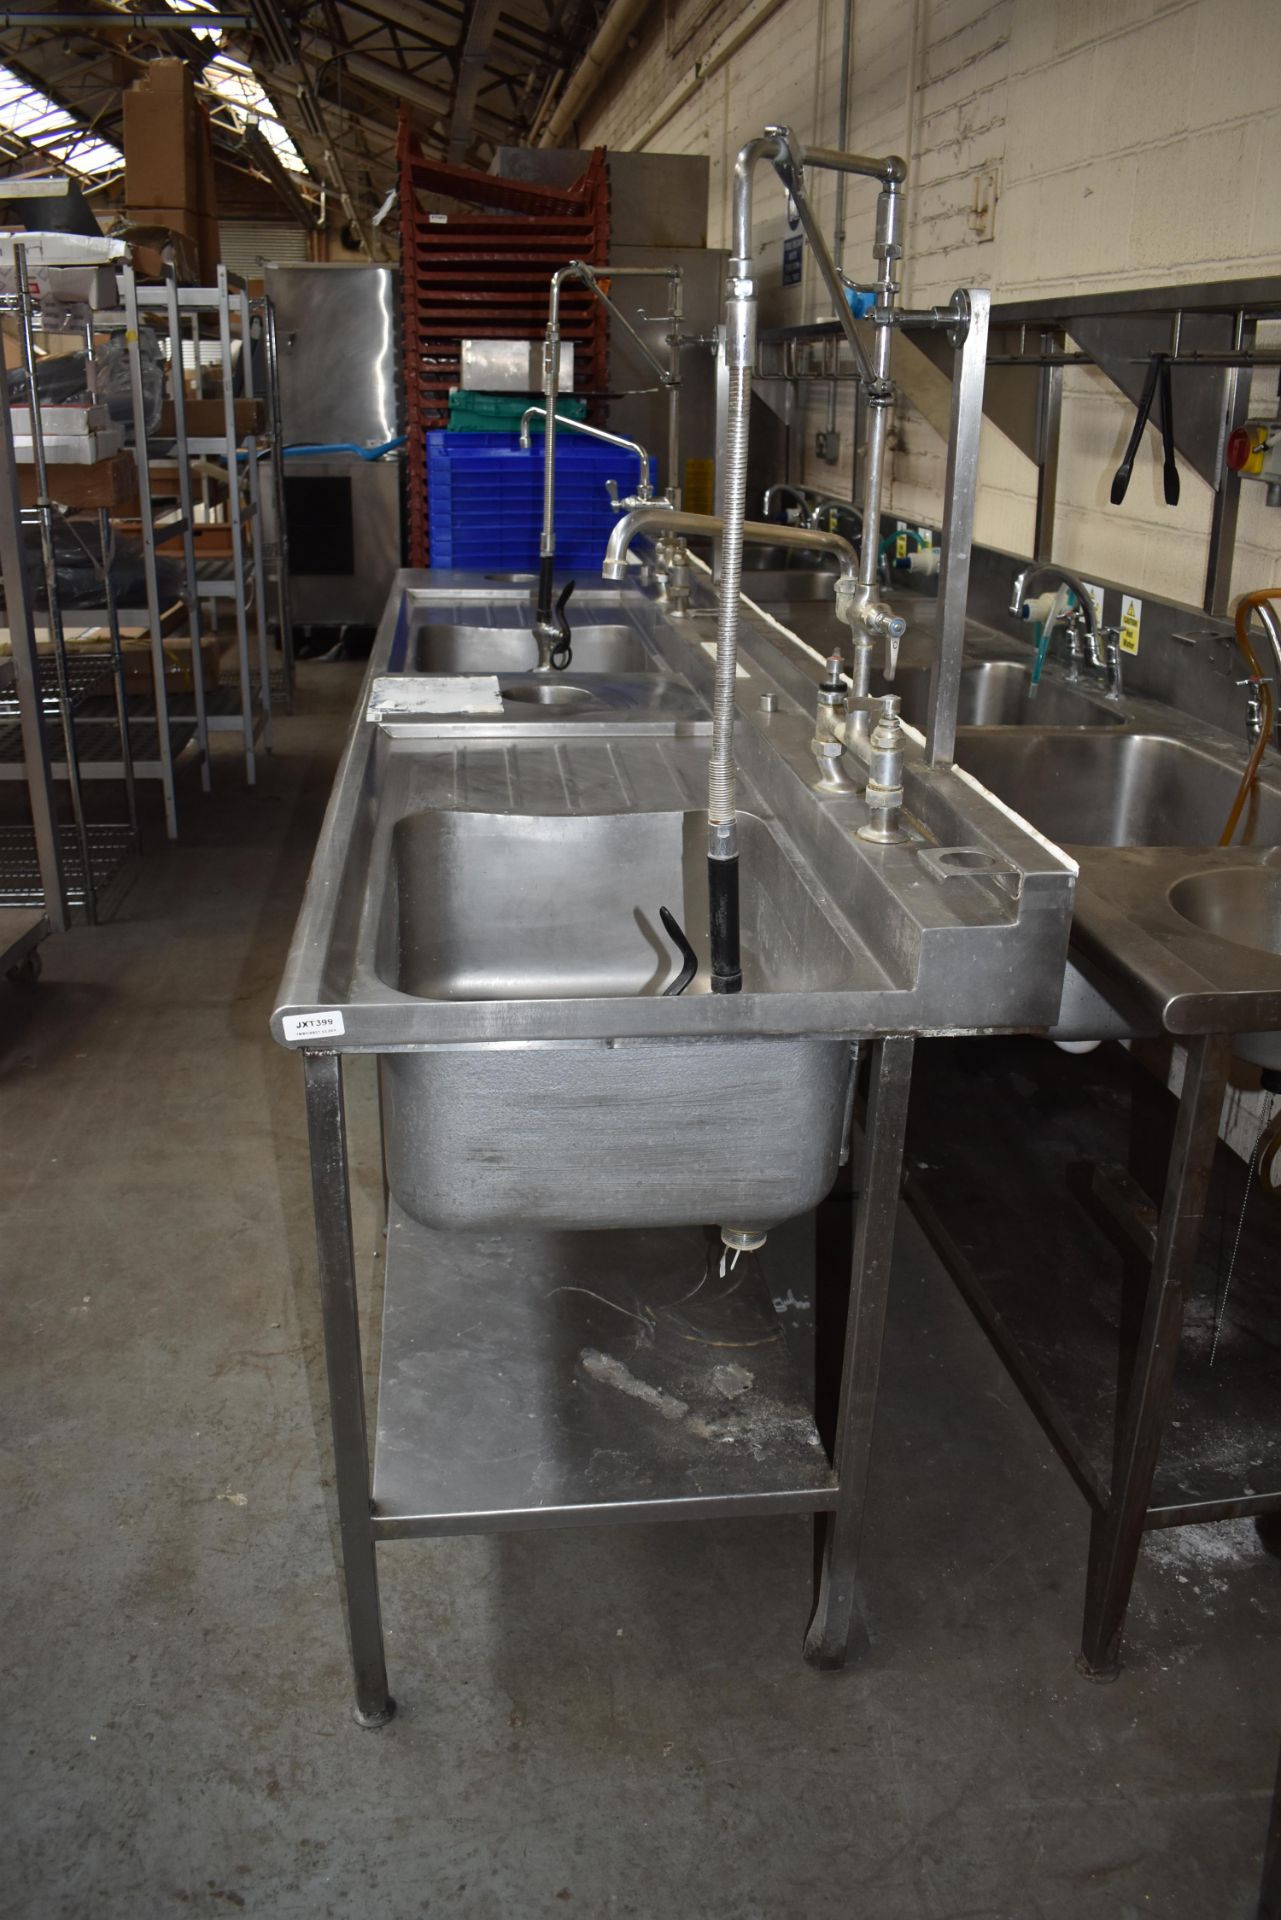 1 x Stainless Steel Commercial Wash Basin Unit With Twin Sink Bowl and Drainers, Mixer Taps, Spray - Image 6 of 12